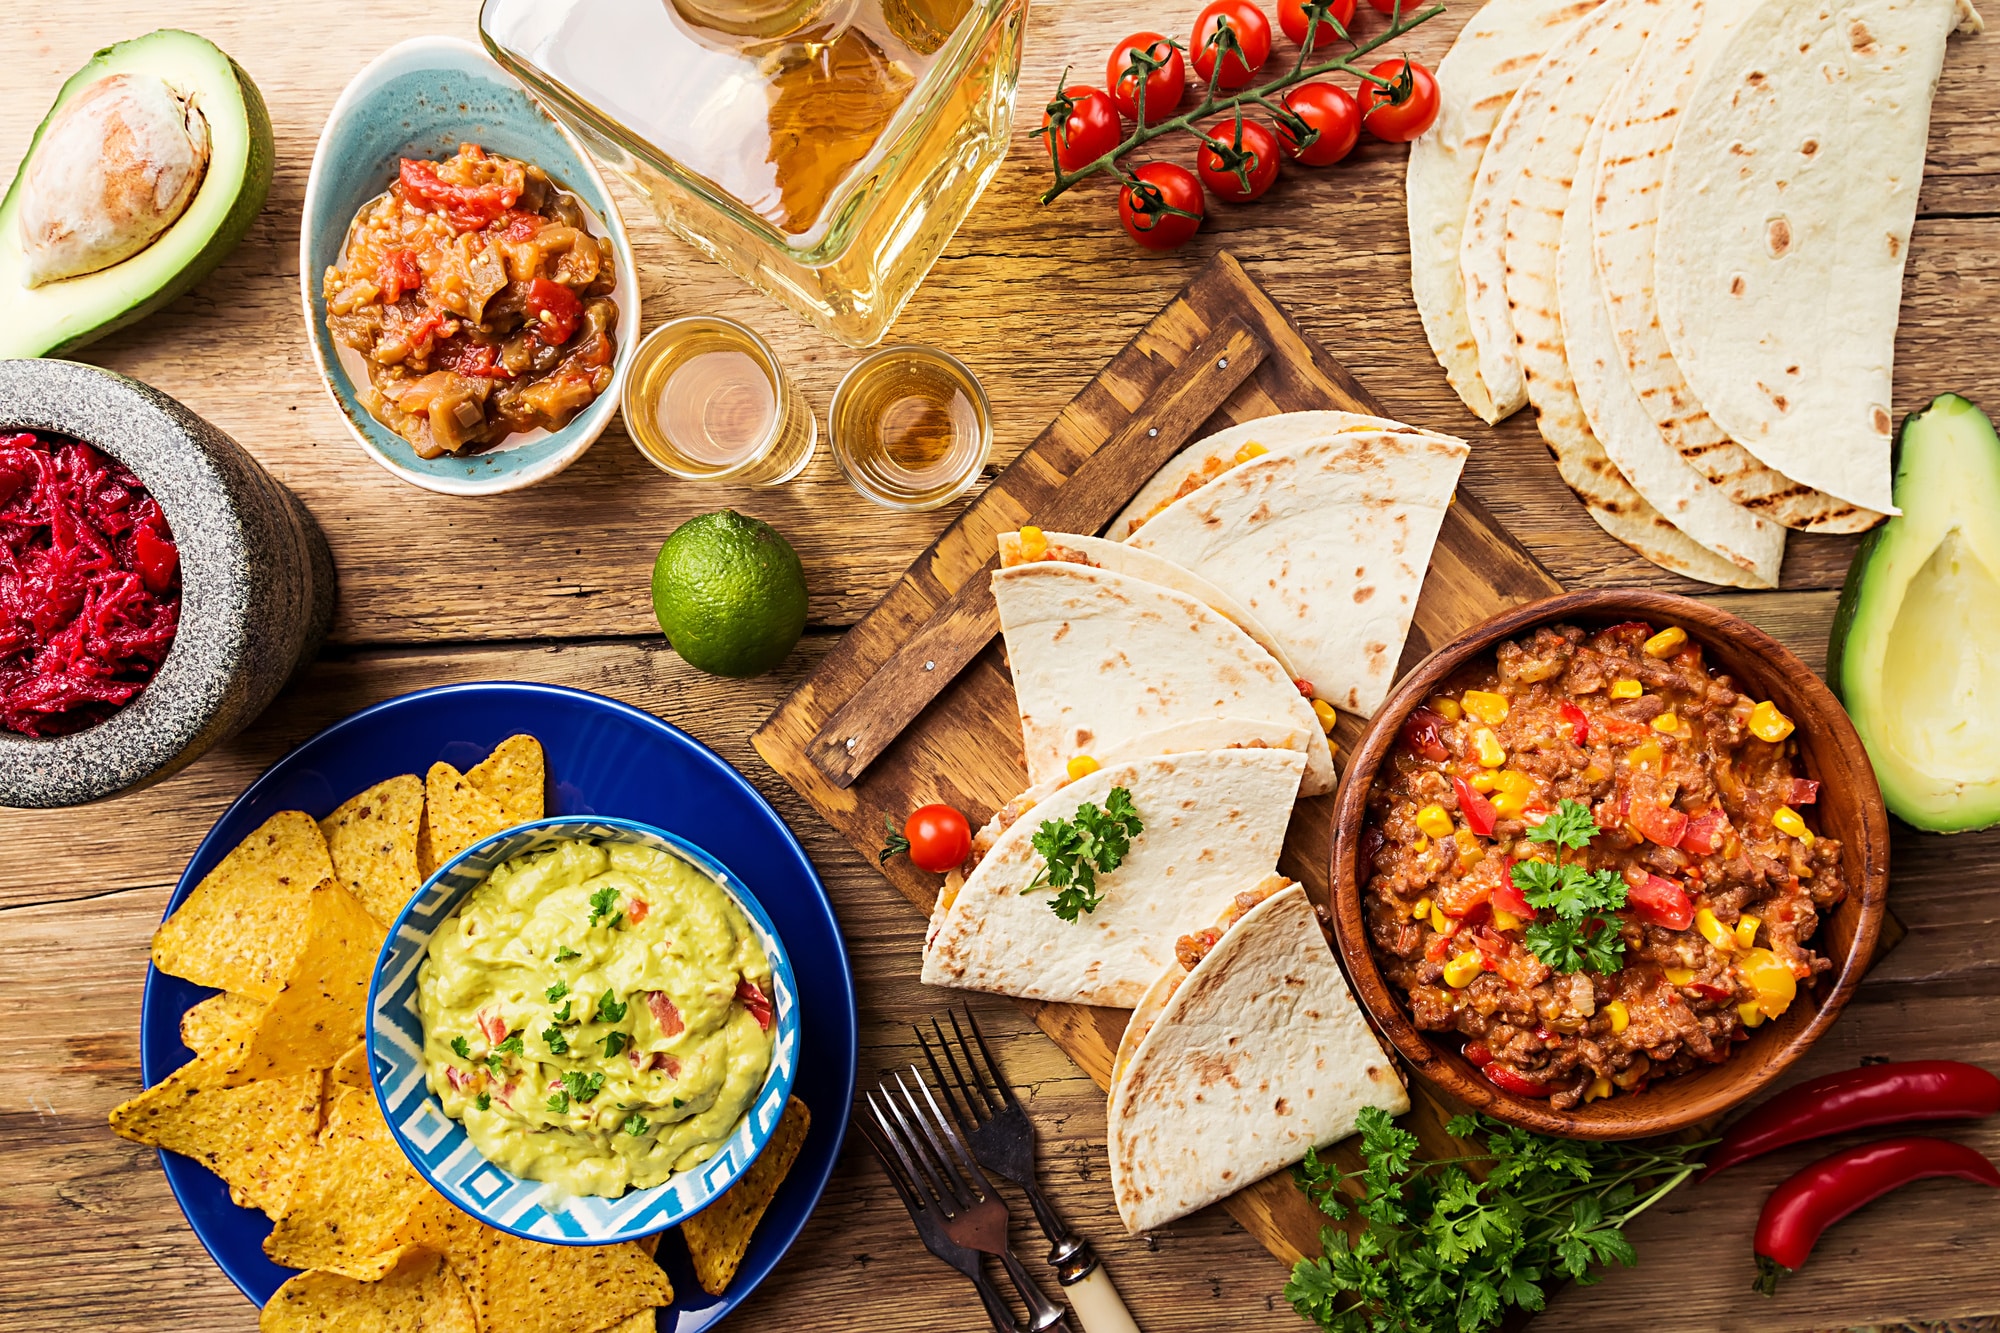 What Are the Common Types of Mexican Food?